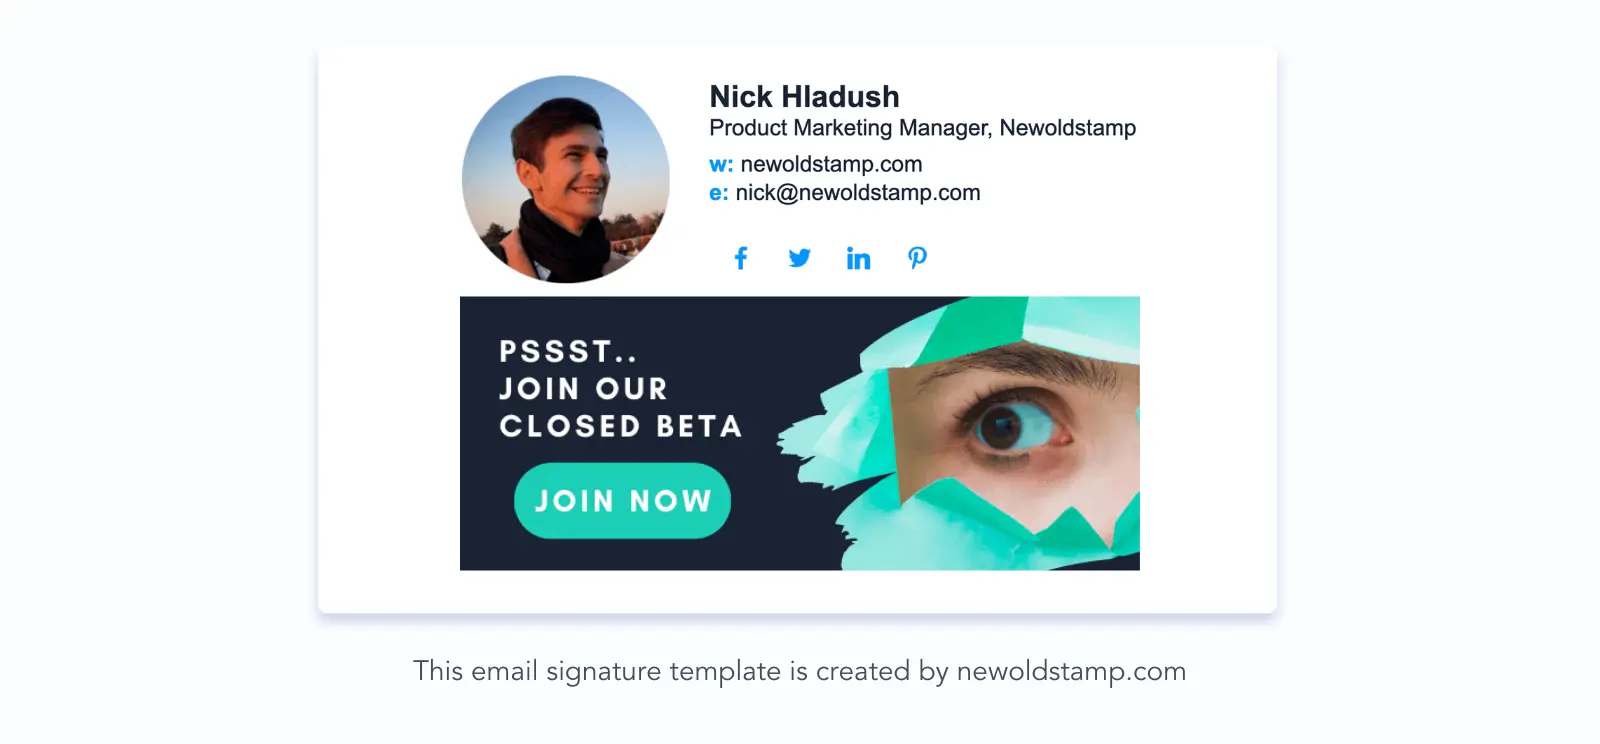 Email signature banner to get more beta users